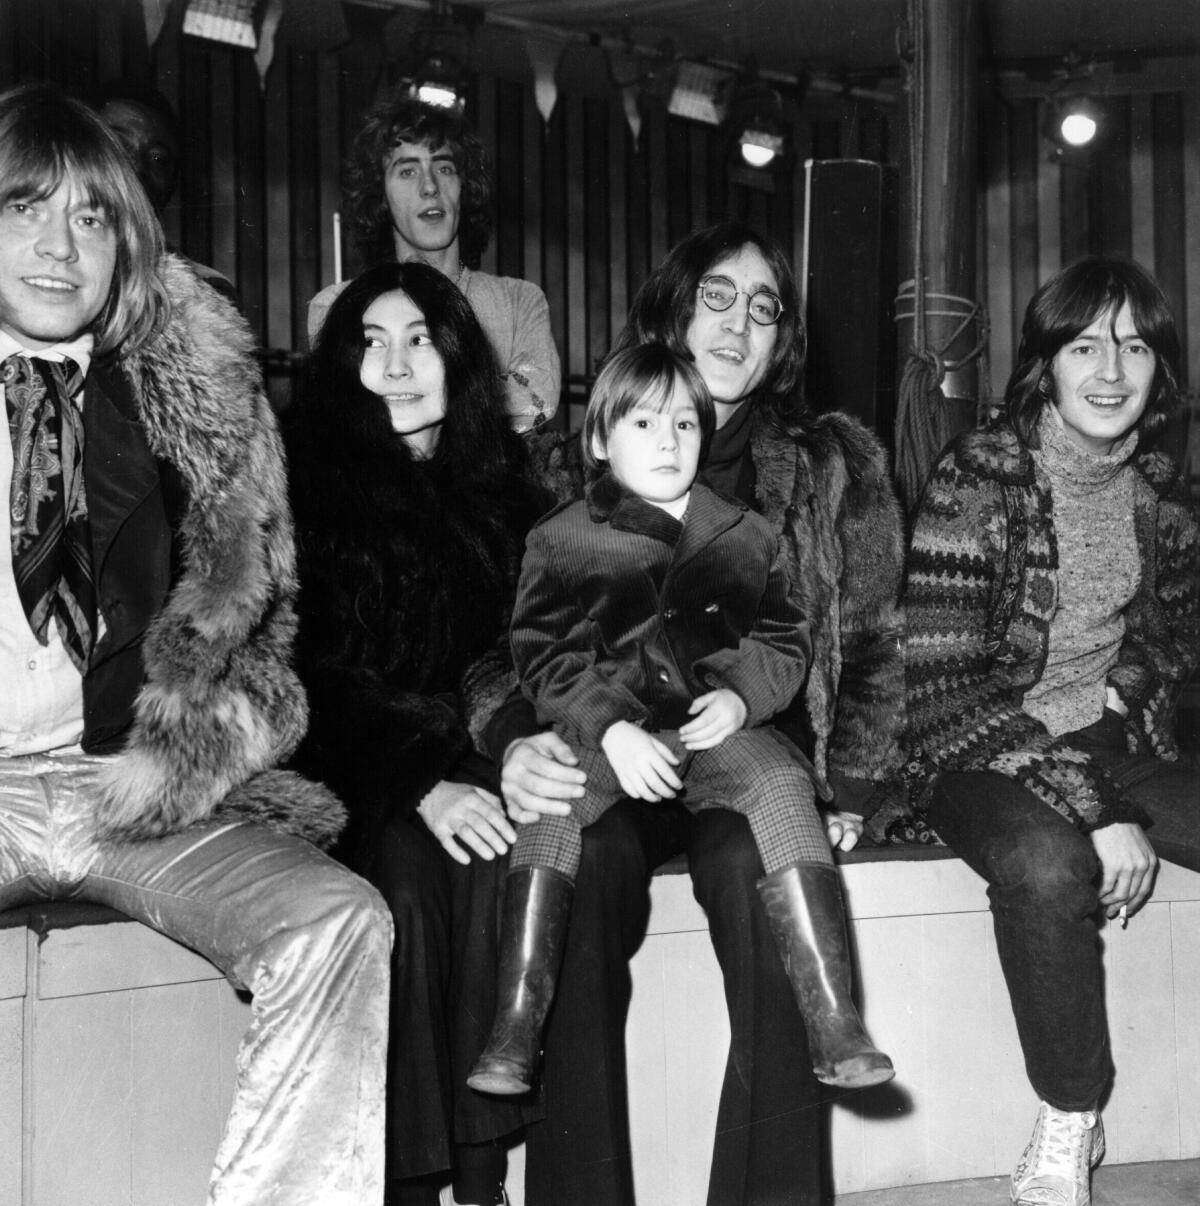 John Lennon, with Yoko Ono and other musicians, sits on a stage with a young Julian Lennon on his lap.